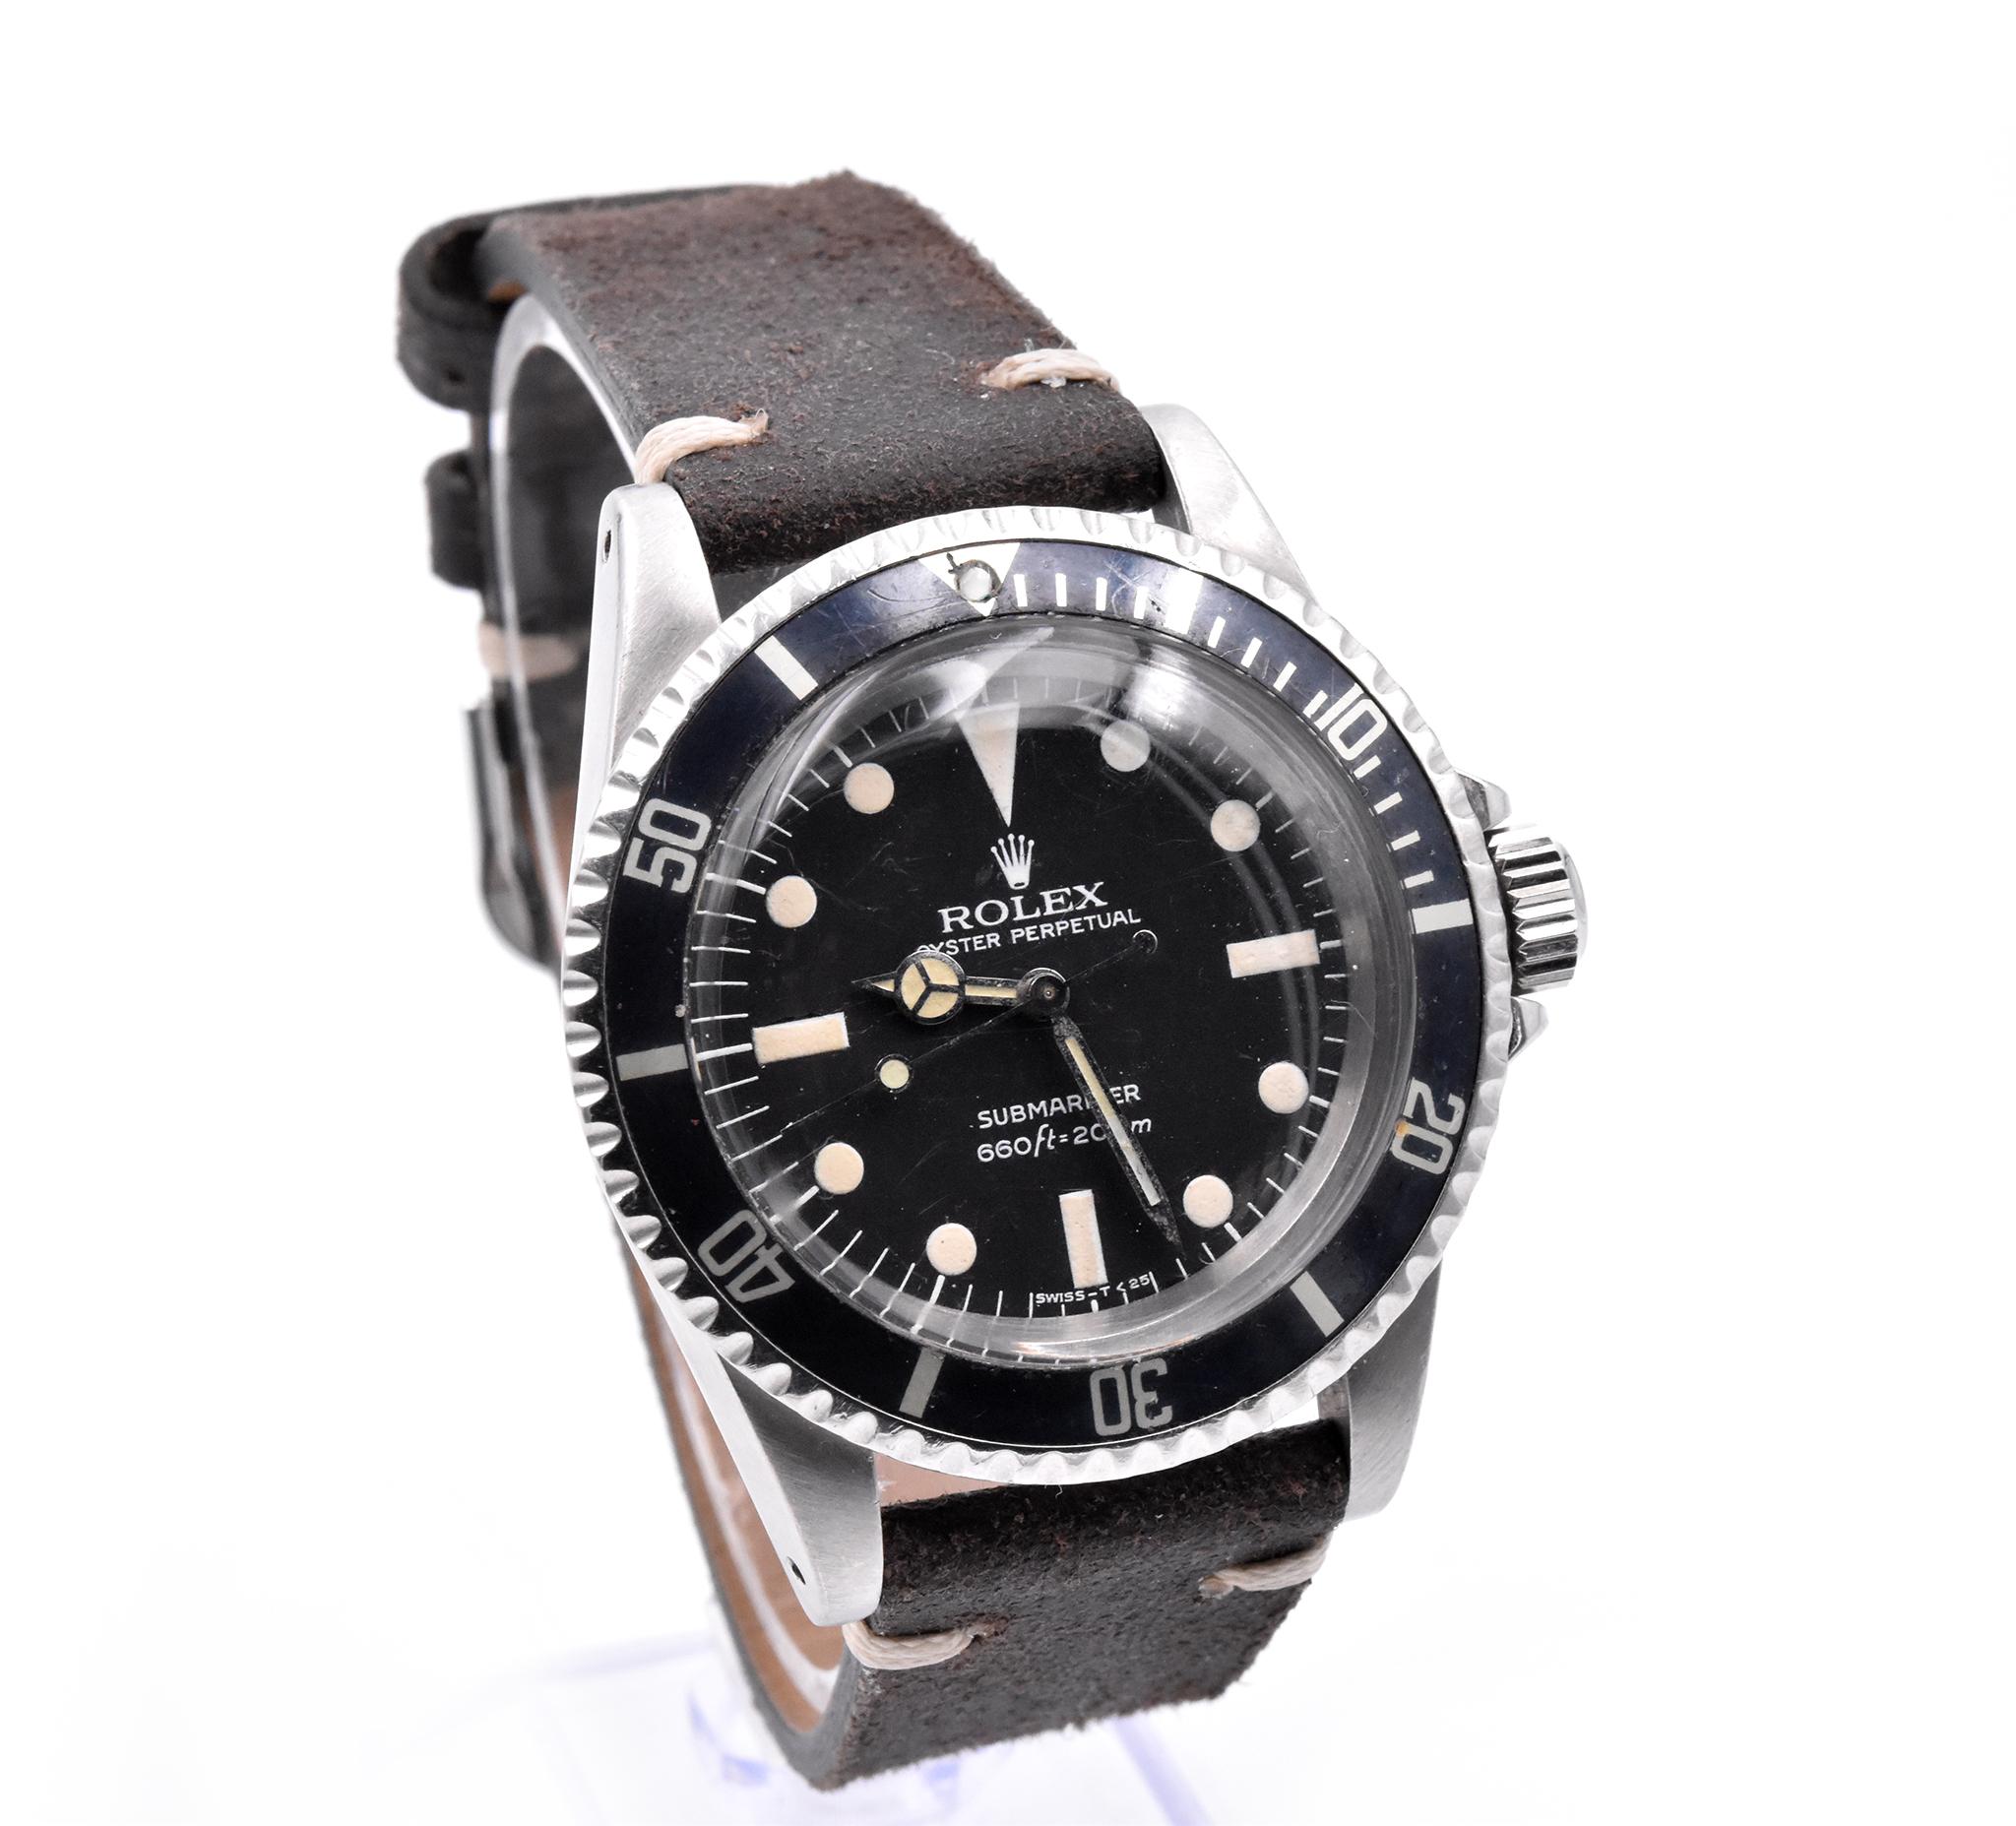 Movement: automatic 1520 movement
Function: hours, minutes, seconds, date
Case: round 40mm stainless-steel case, sapphire crystal, stainless steel bezel with black insert, screw-down crown, waterproof to 200 meters
Band: brown leather strap
Dial: